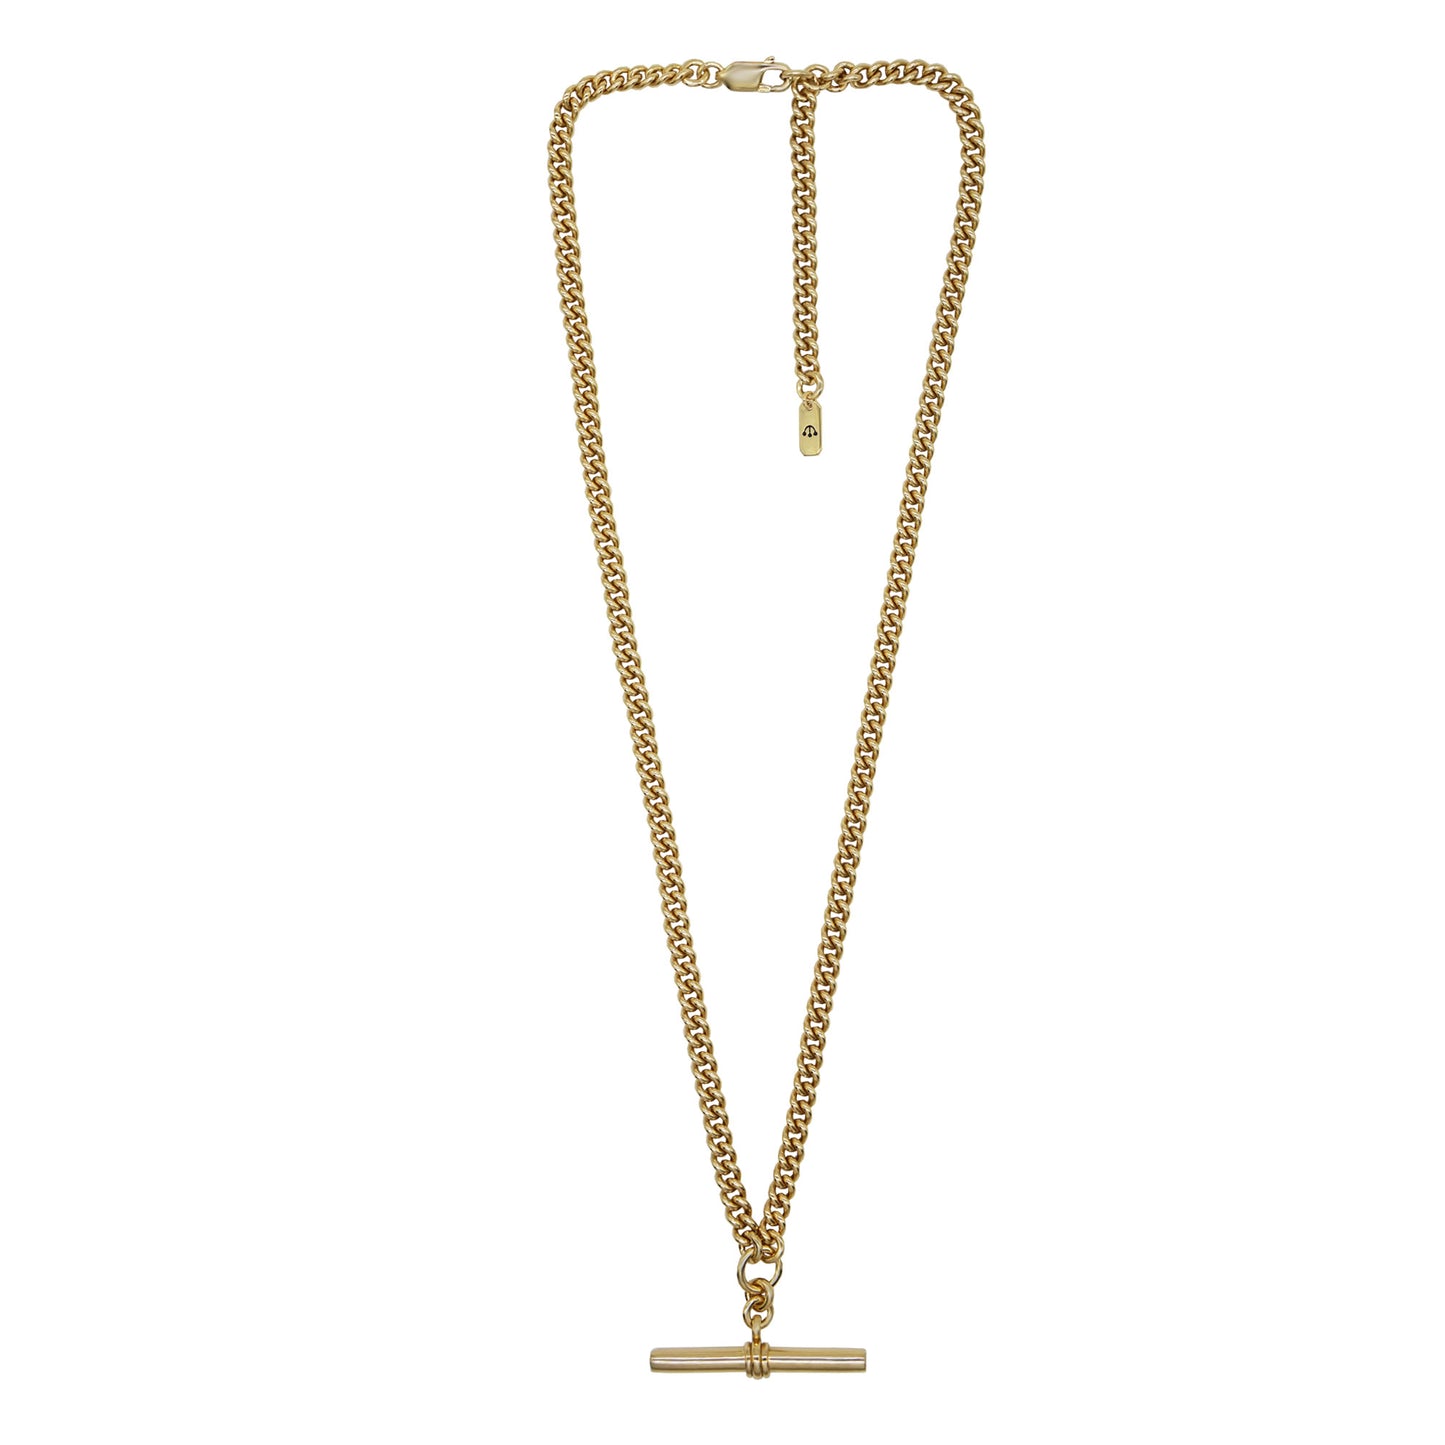 Zoomed out view of Pawnshop gold plated sterling silver T bar necklace. Curb chain detail with a T bar charm feature.